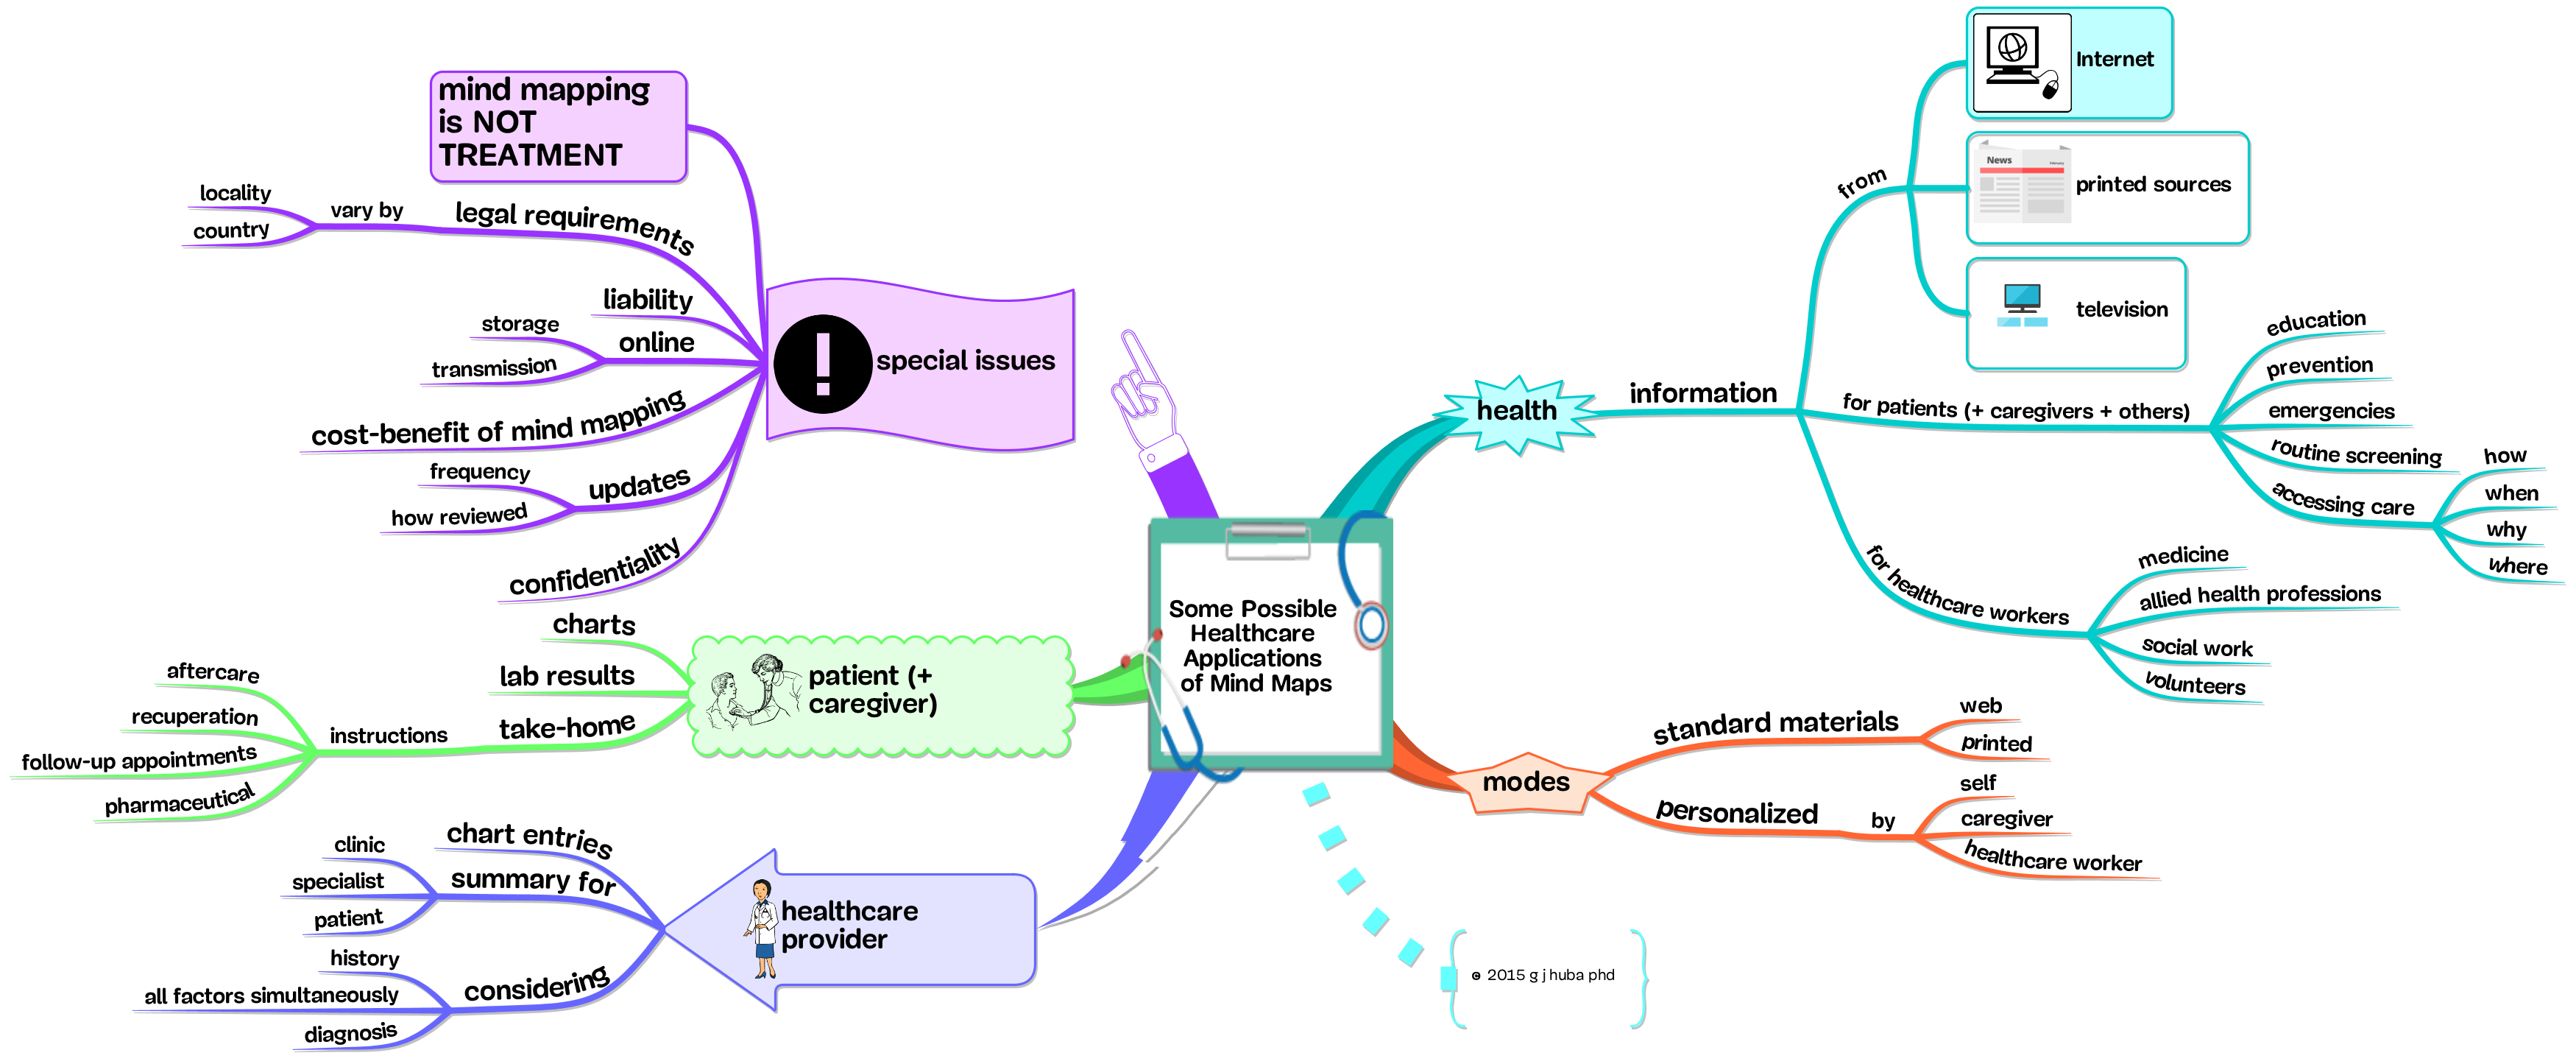 Some Possible  Healthcare Applications  of Mind Maps